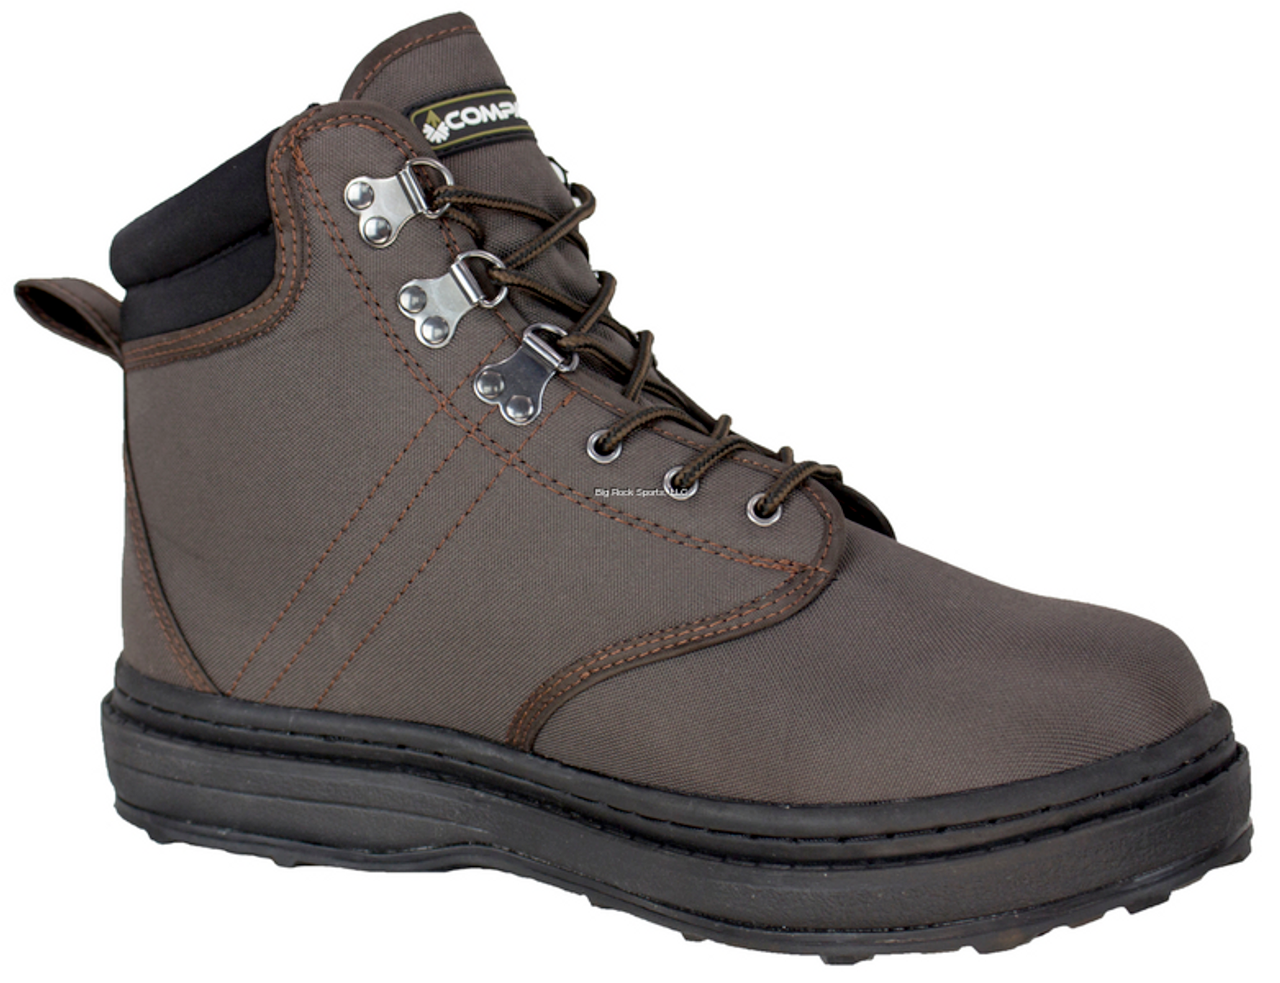 Compass 360 STILLWATER II Cleated Wading Shoes, Dark Brown, Size: 7